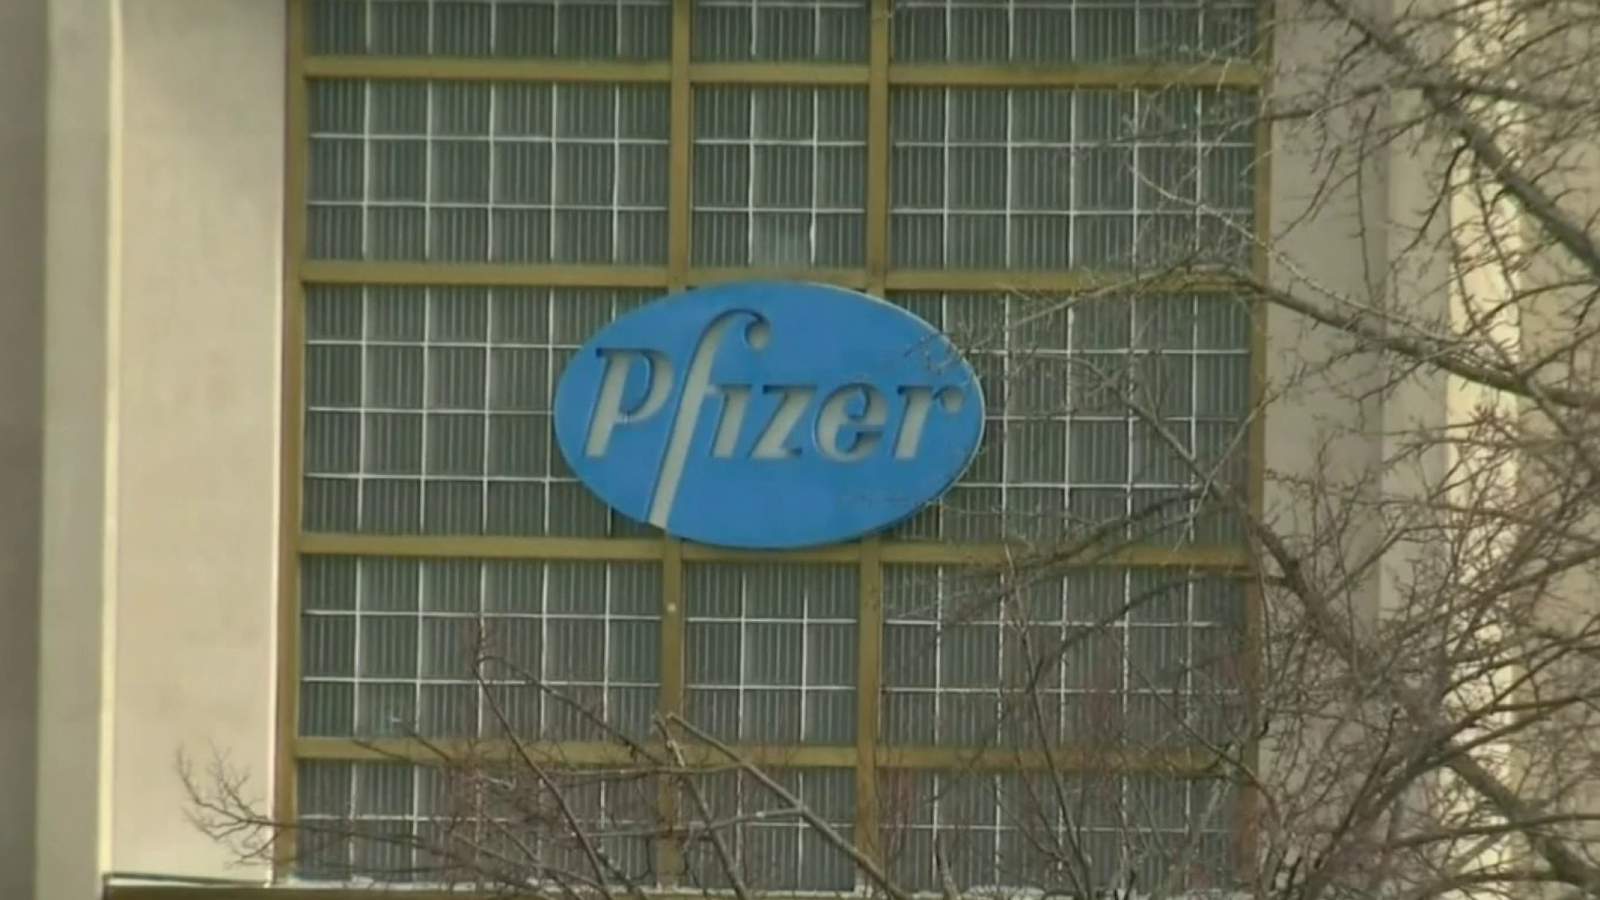 2.9 million COVID vaccine doses to ship out of Pfizer plants in Michigan, Wisconsin